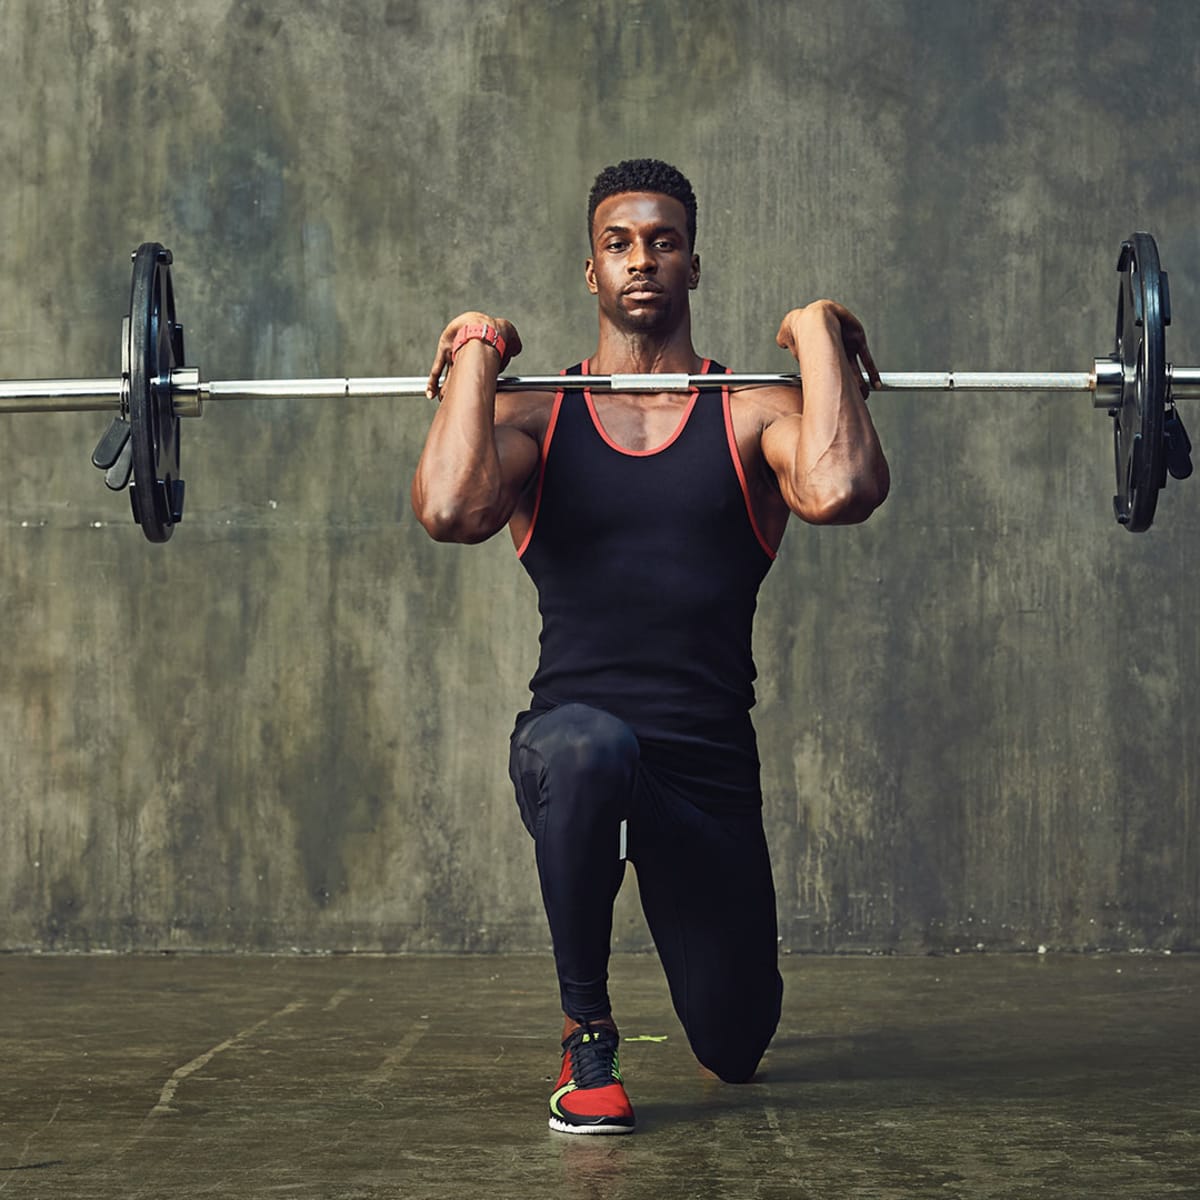 squat: 6 Best Outer Quad Muscles Exercises for Your Legs